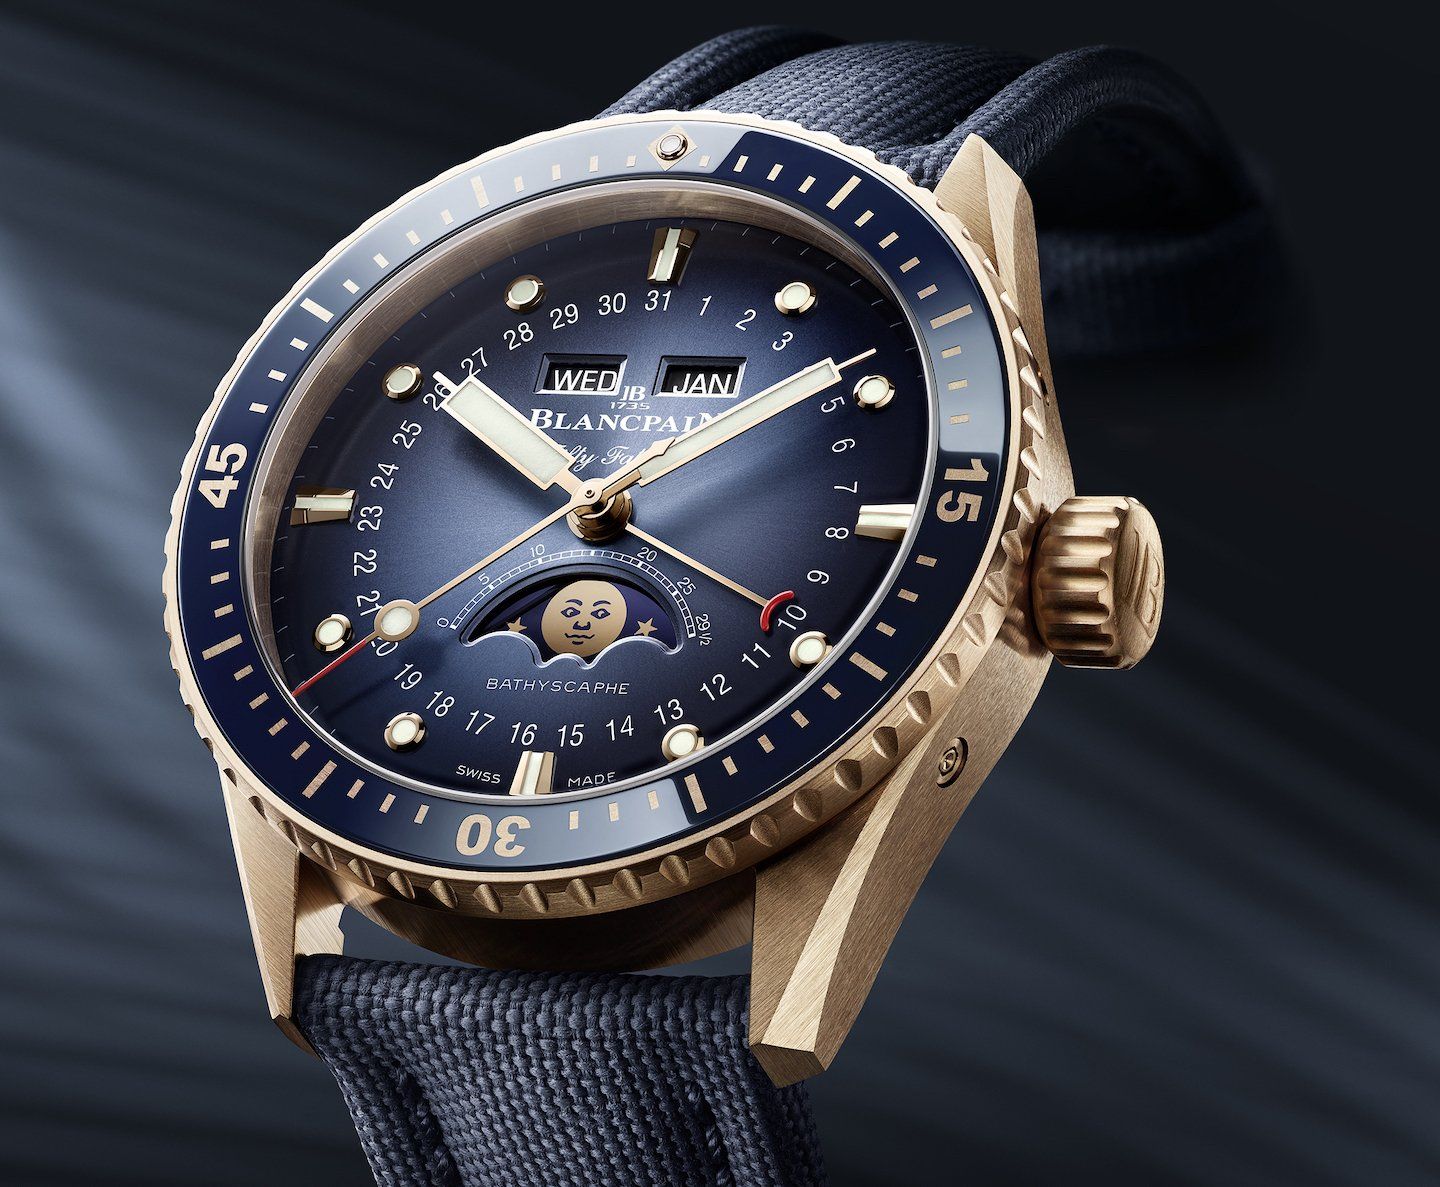 All-New Fifty Fathoms Bathyscaphe Quantième Complet: Best Of Both Worlds